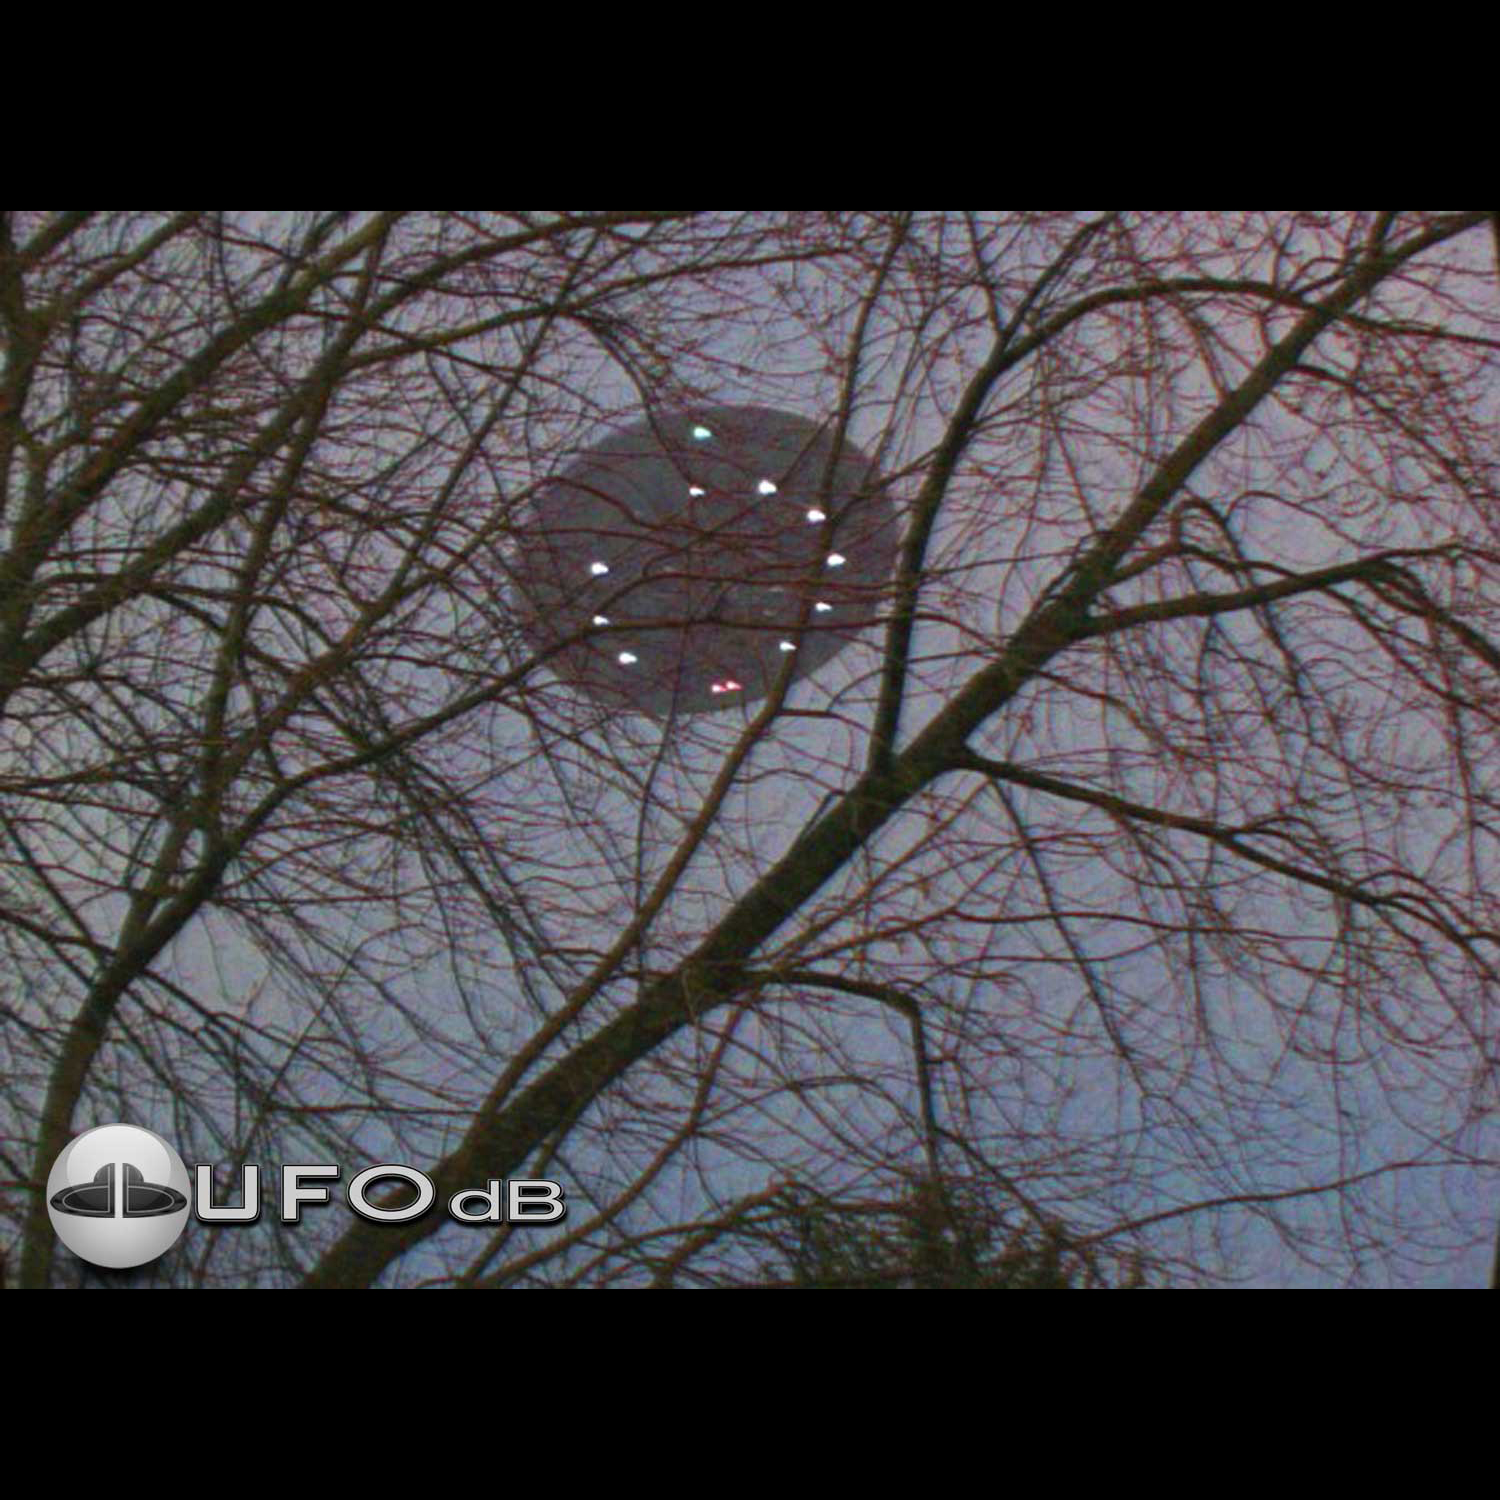 Incredible UFO Picture  we can see under, all the lights of the UFO UFO Picture #37-1